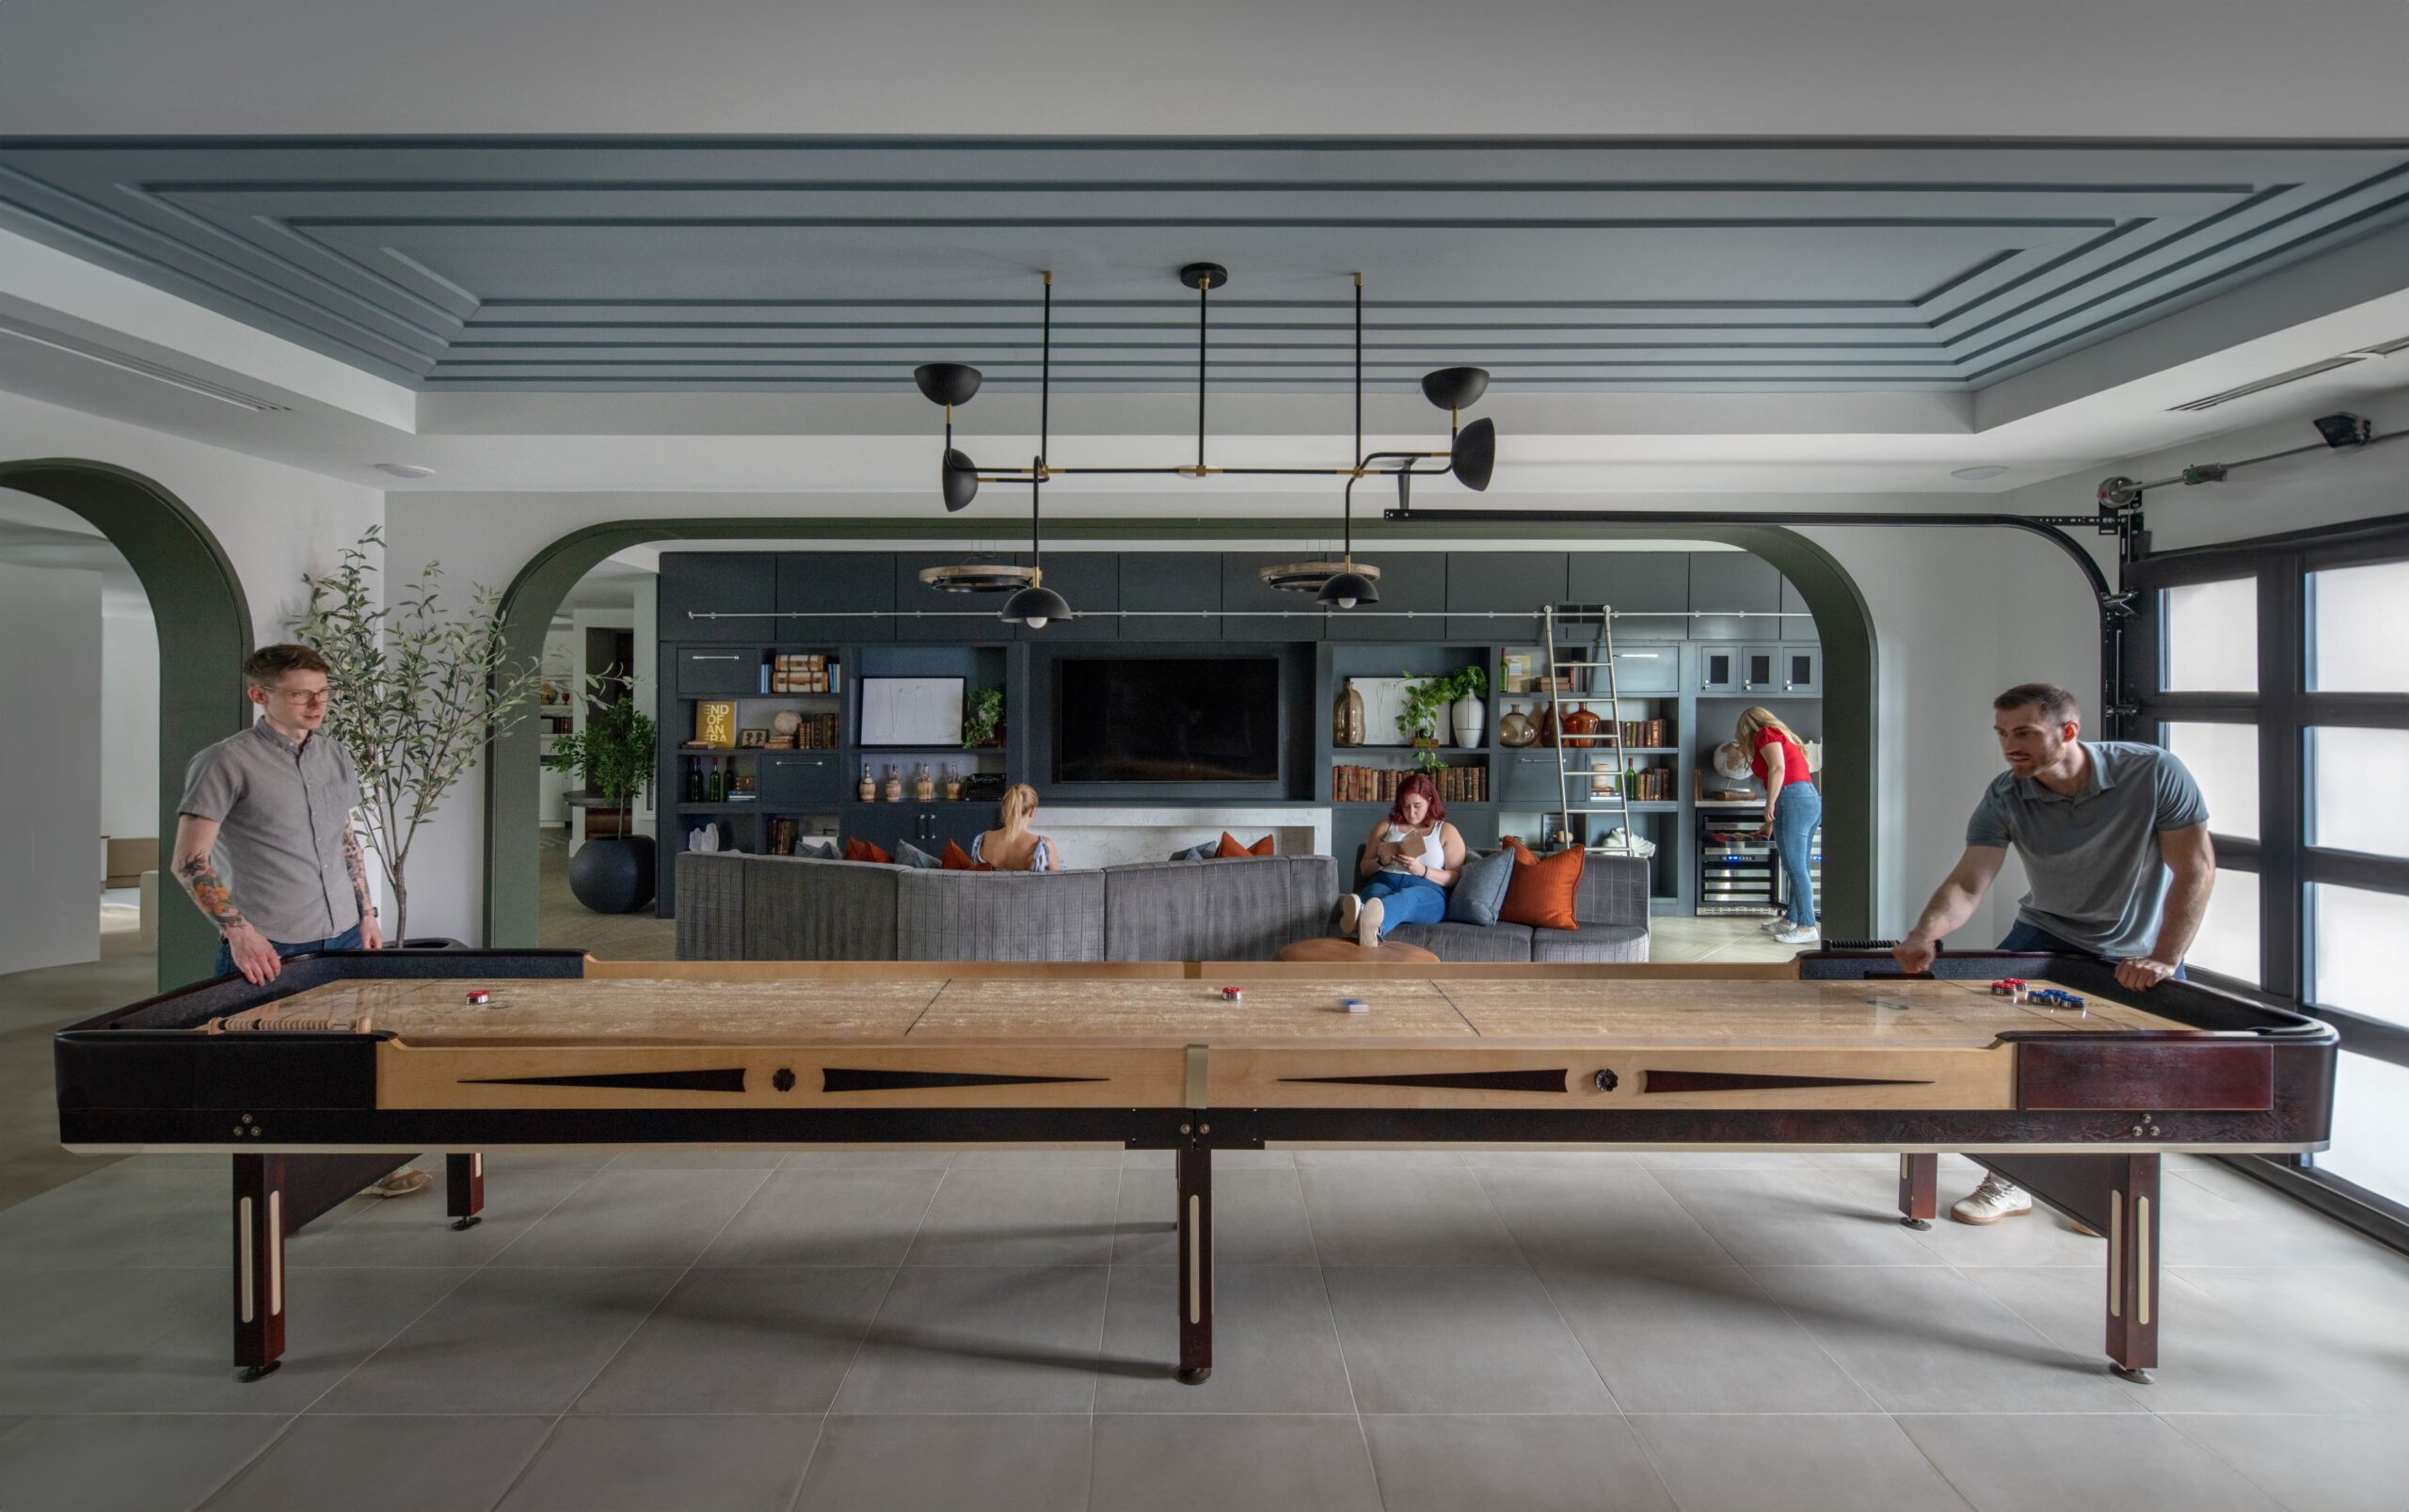 Game room with shuffleboard featured and lounge area in the background